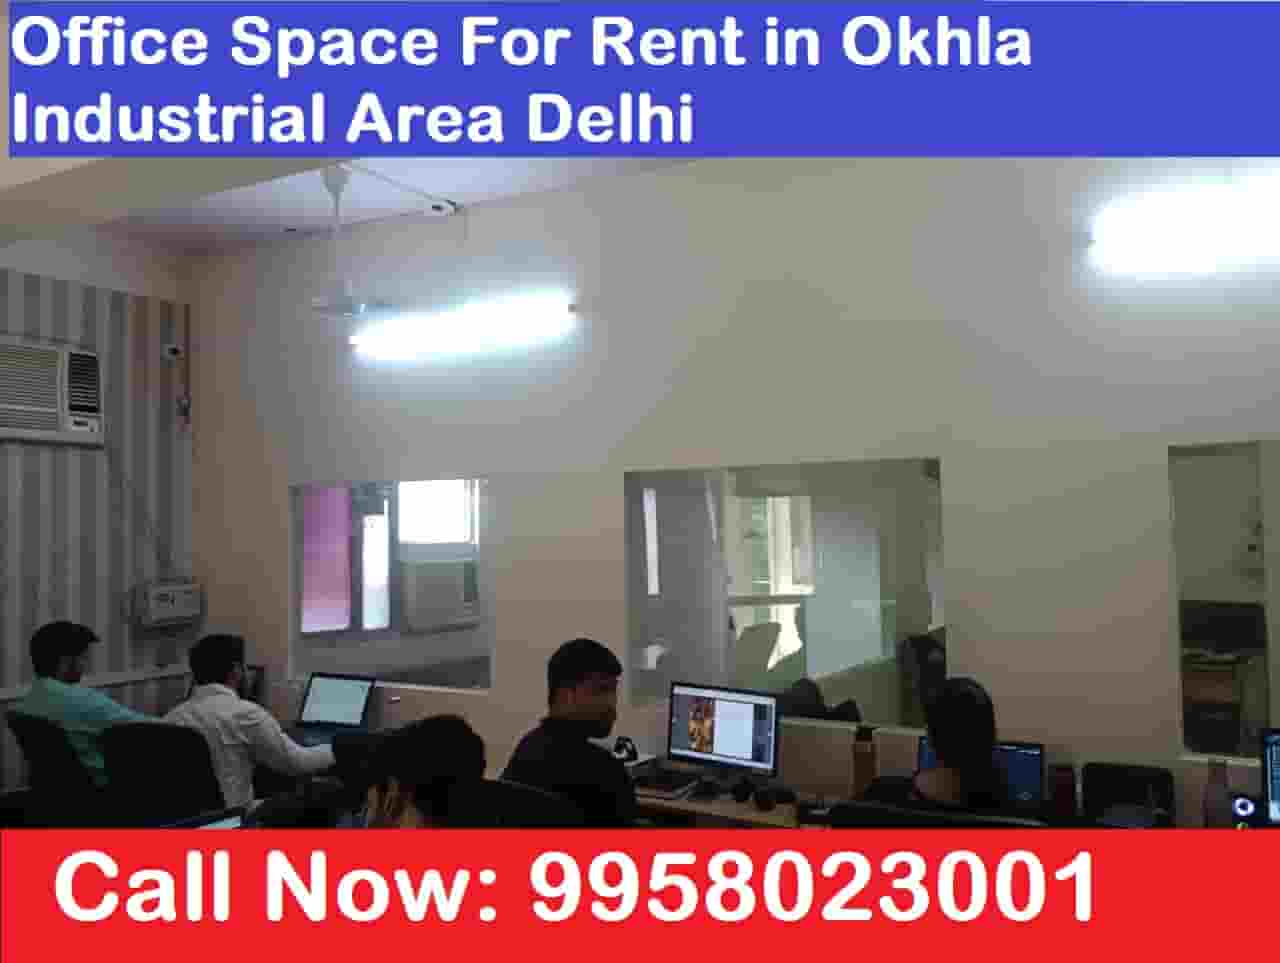 Office Space For Rent in Okhla Industrial Area Delhi